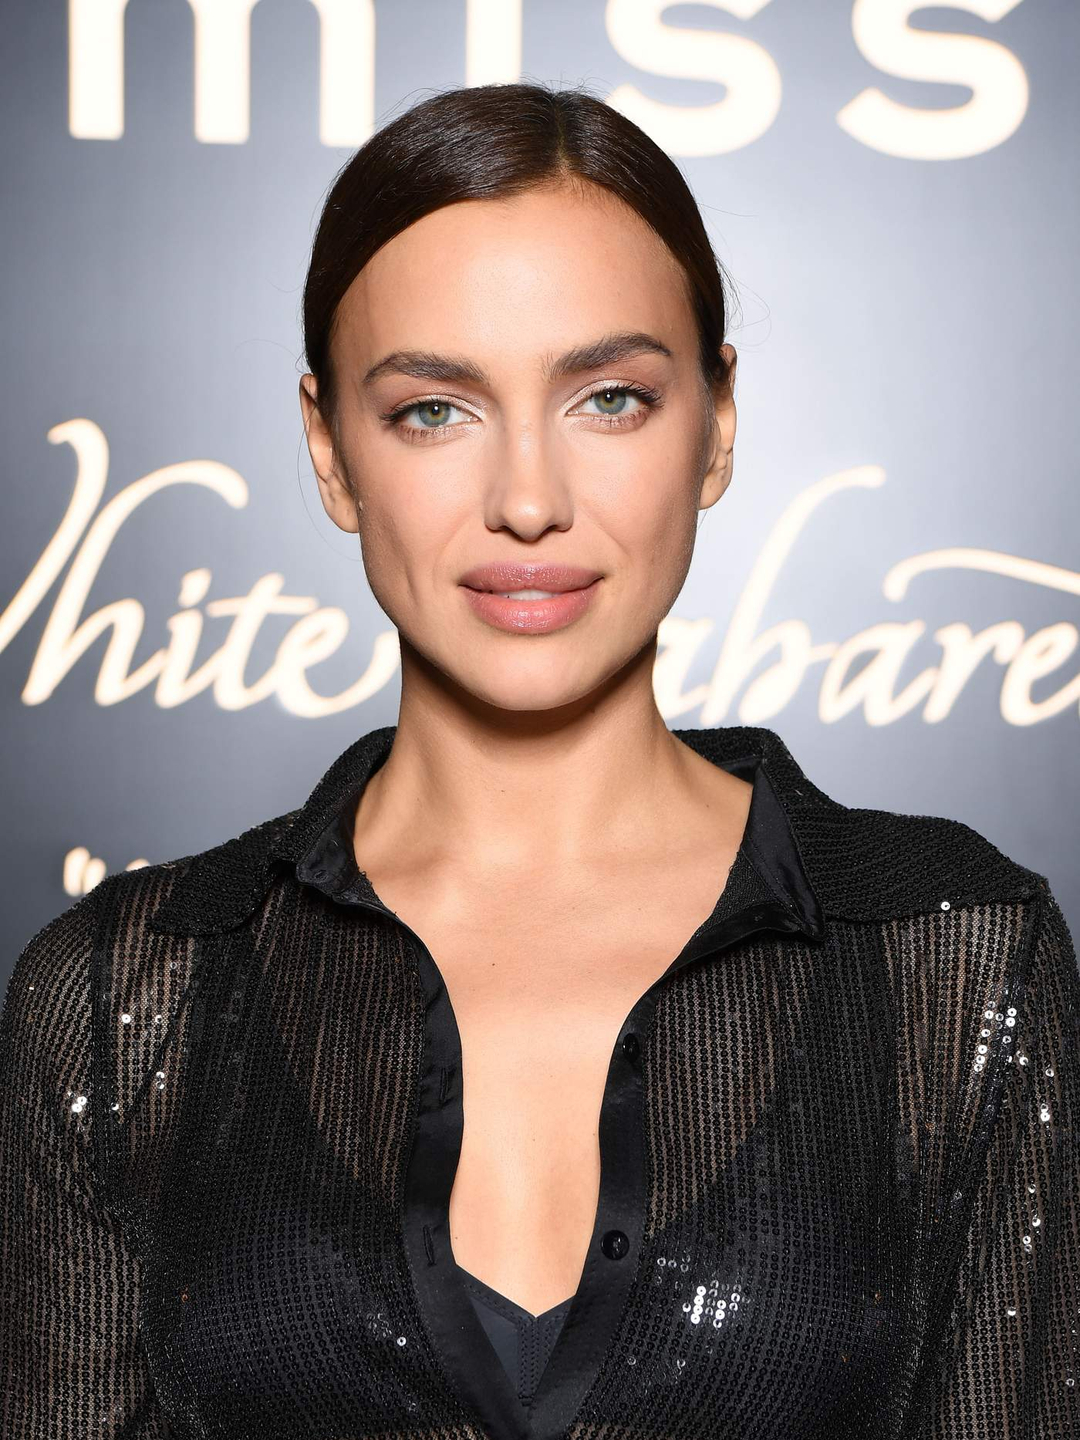 Irina Shayk how did she became famous